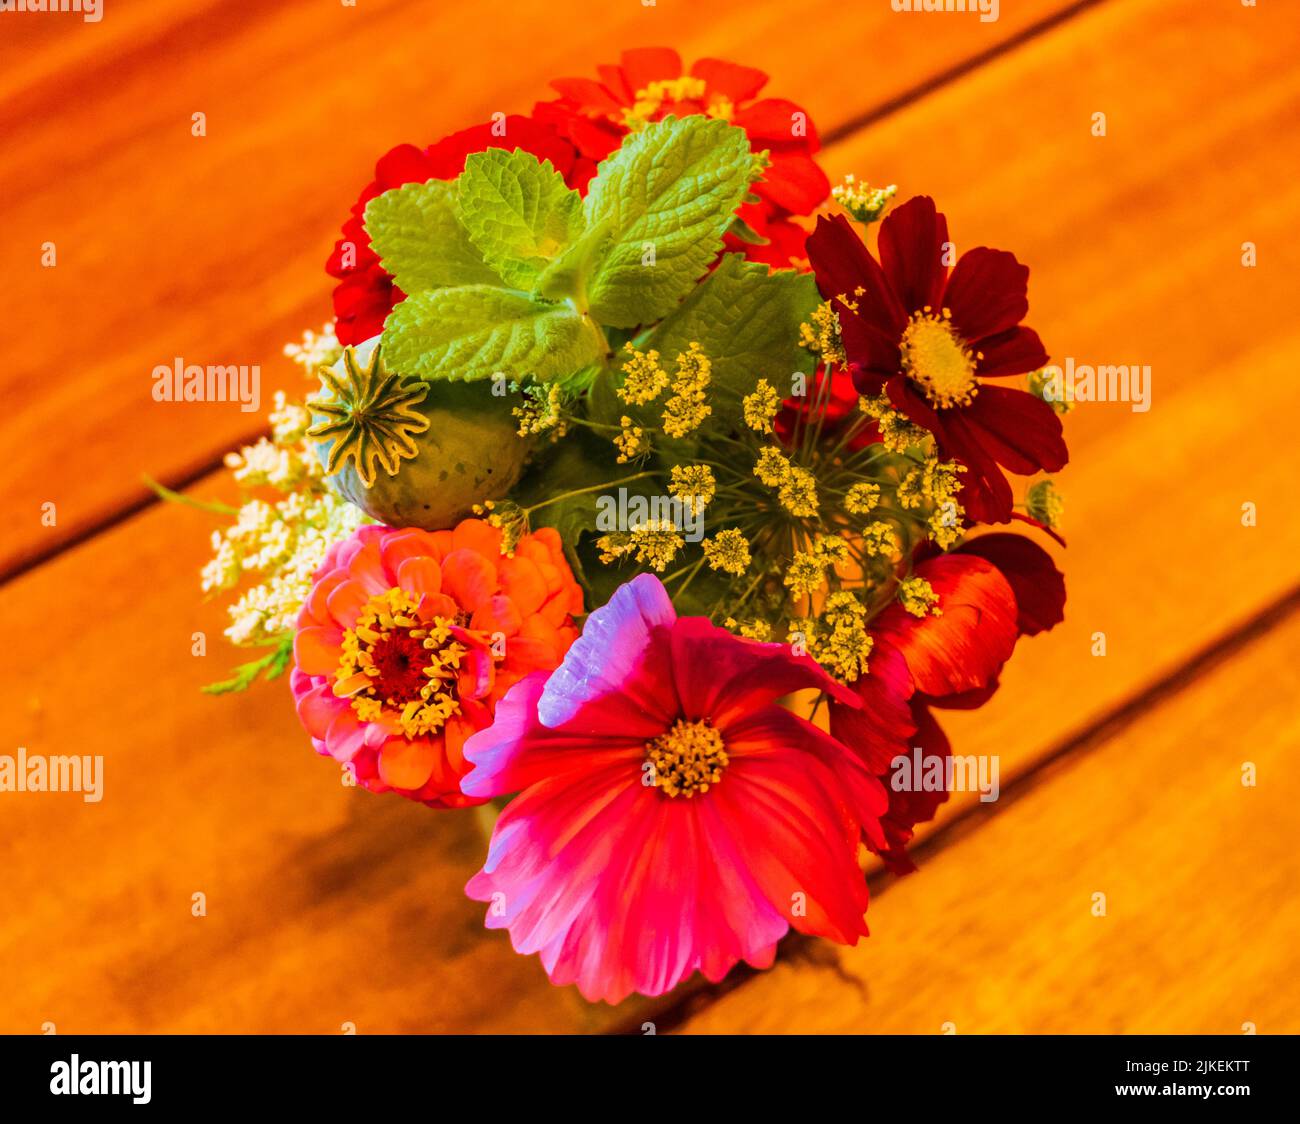 small bouquet of garden flowers zinnias, cosmos and wildflowers on the table Stock Photo